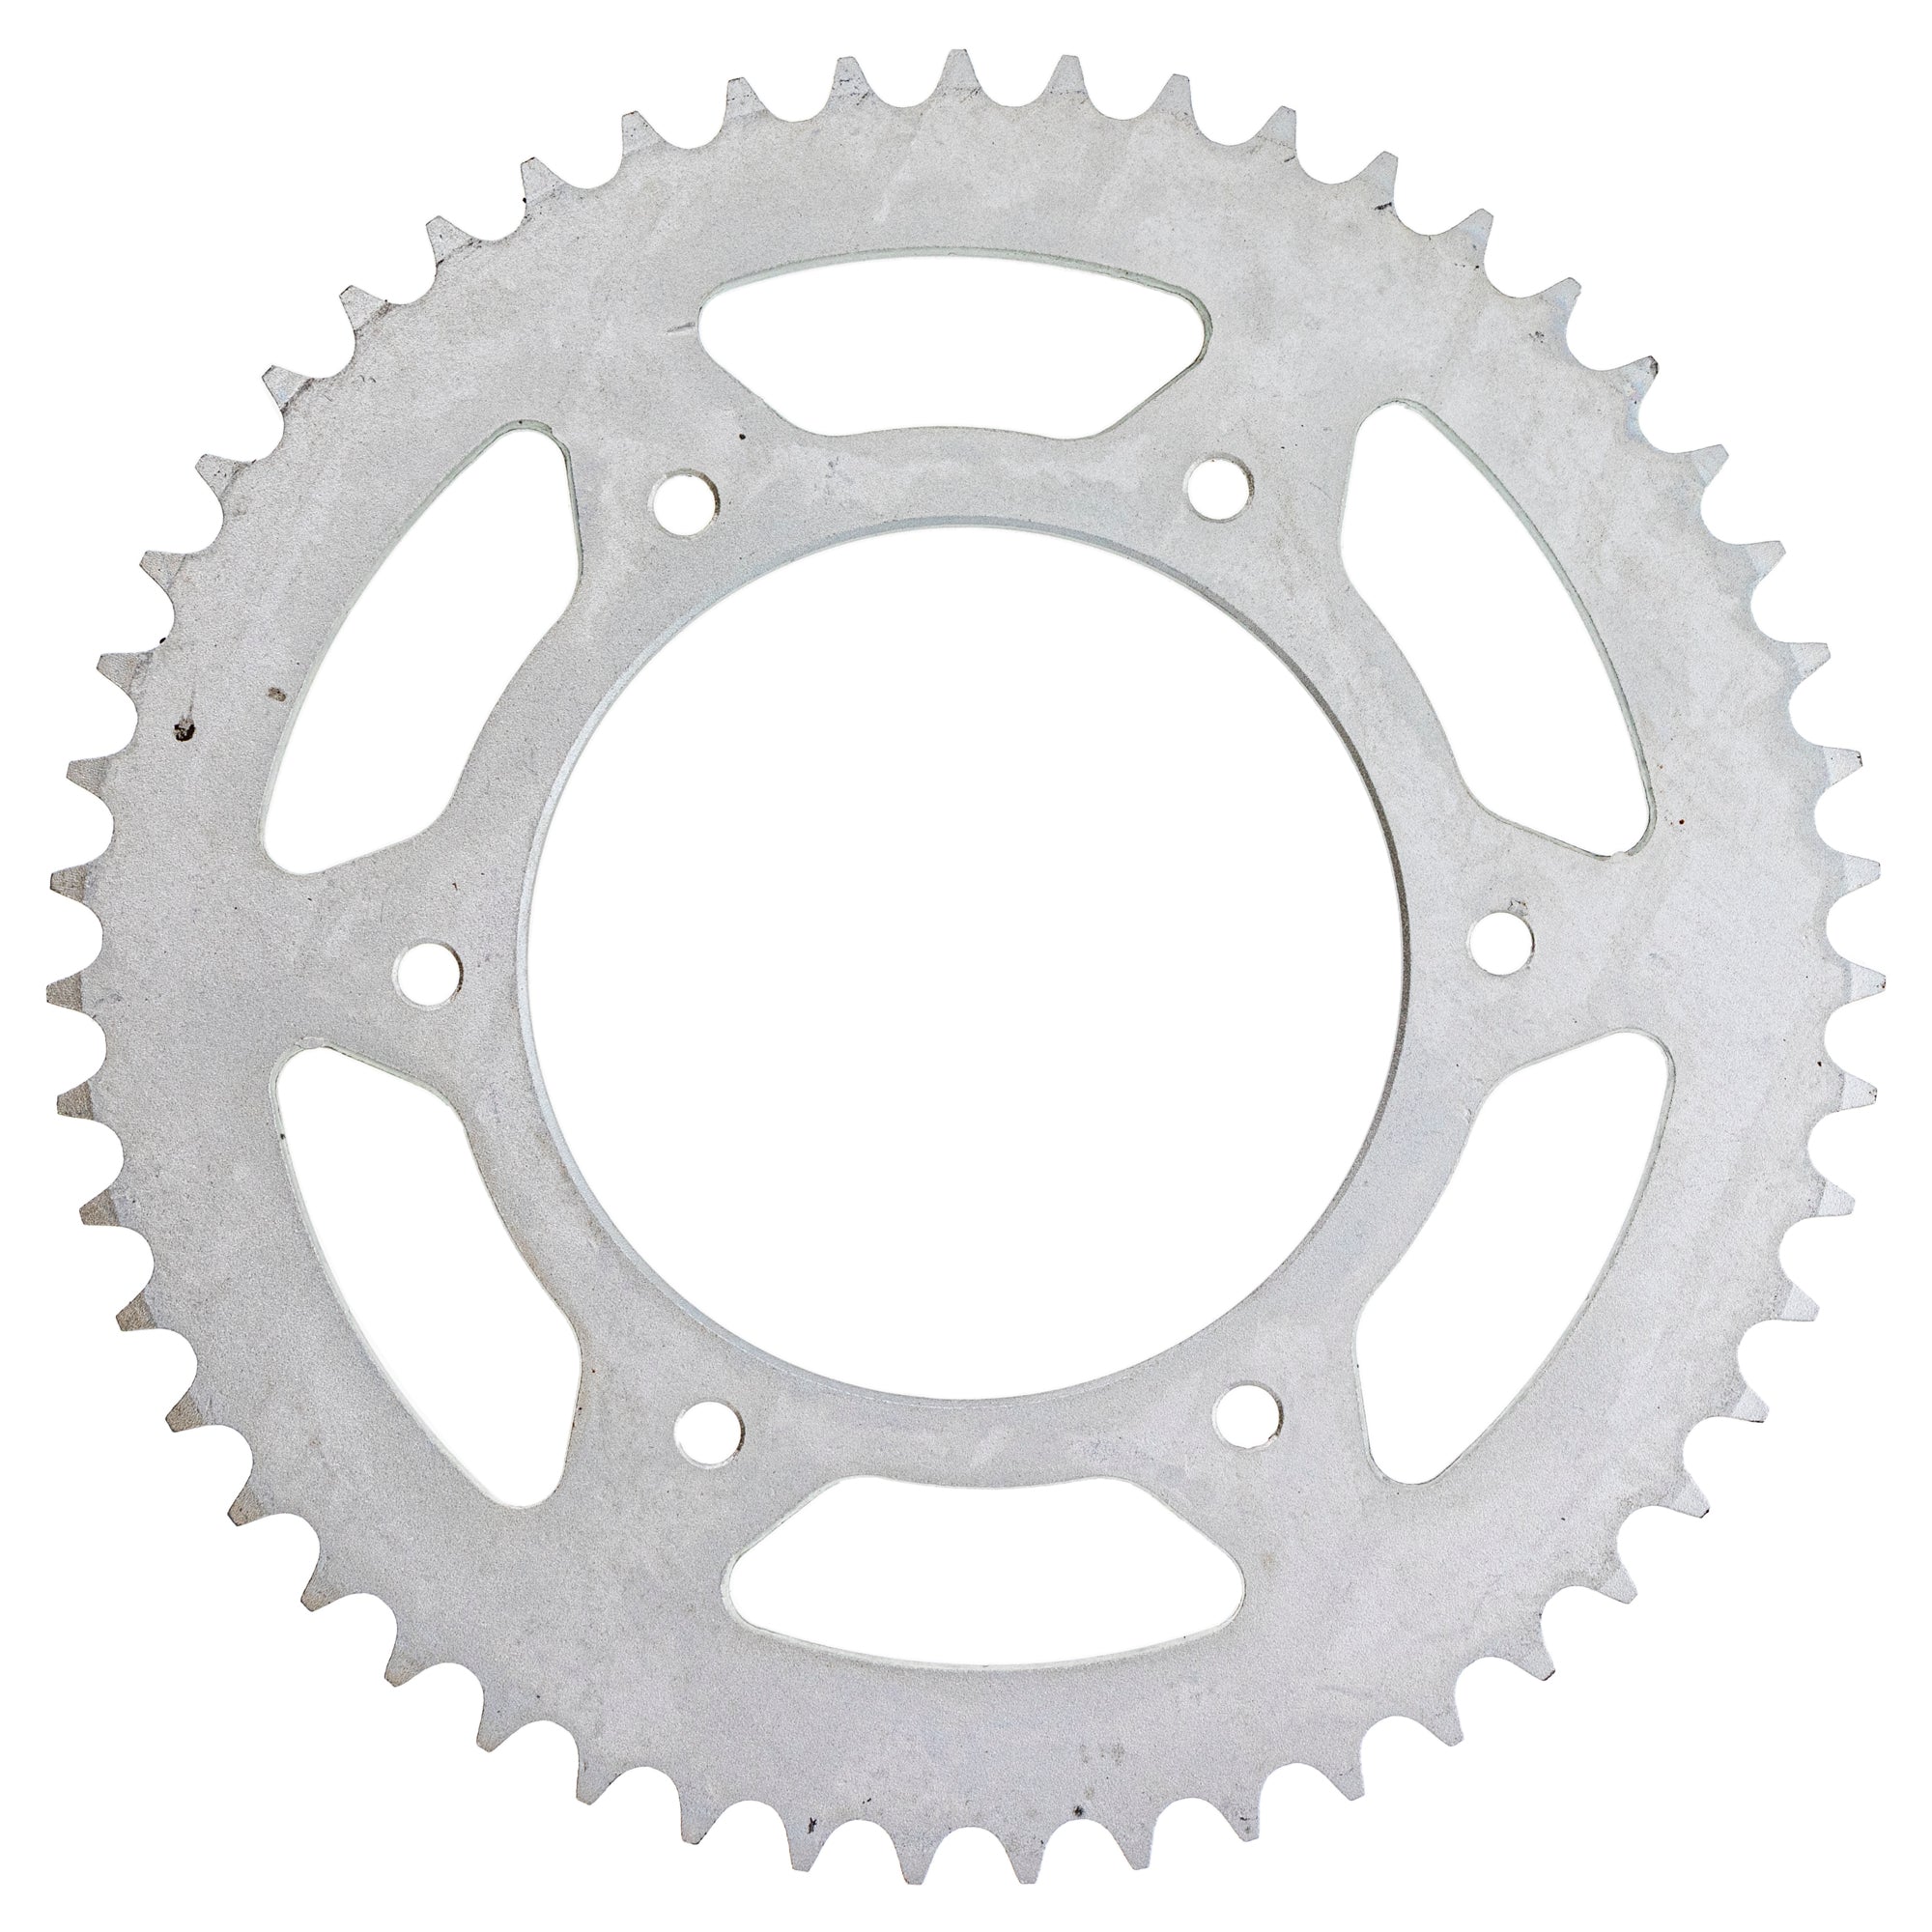 520 Front 13T Rear 51T Drive Sprocket Kit for Honda CRF250R